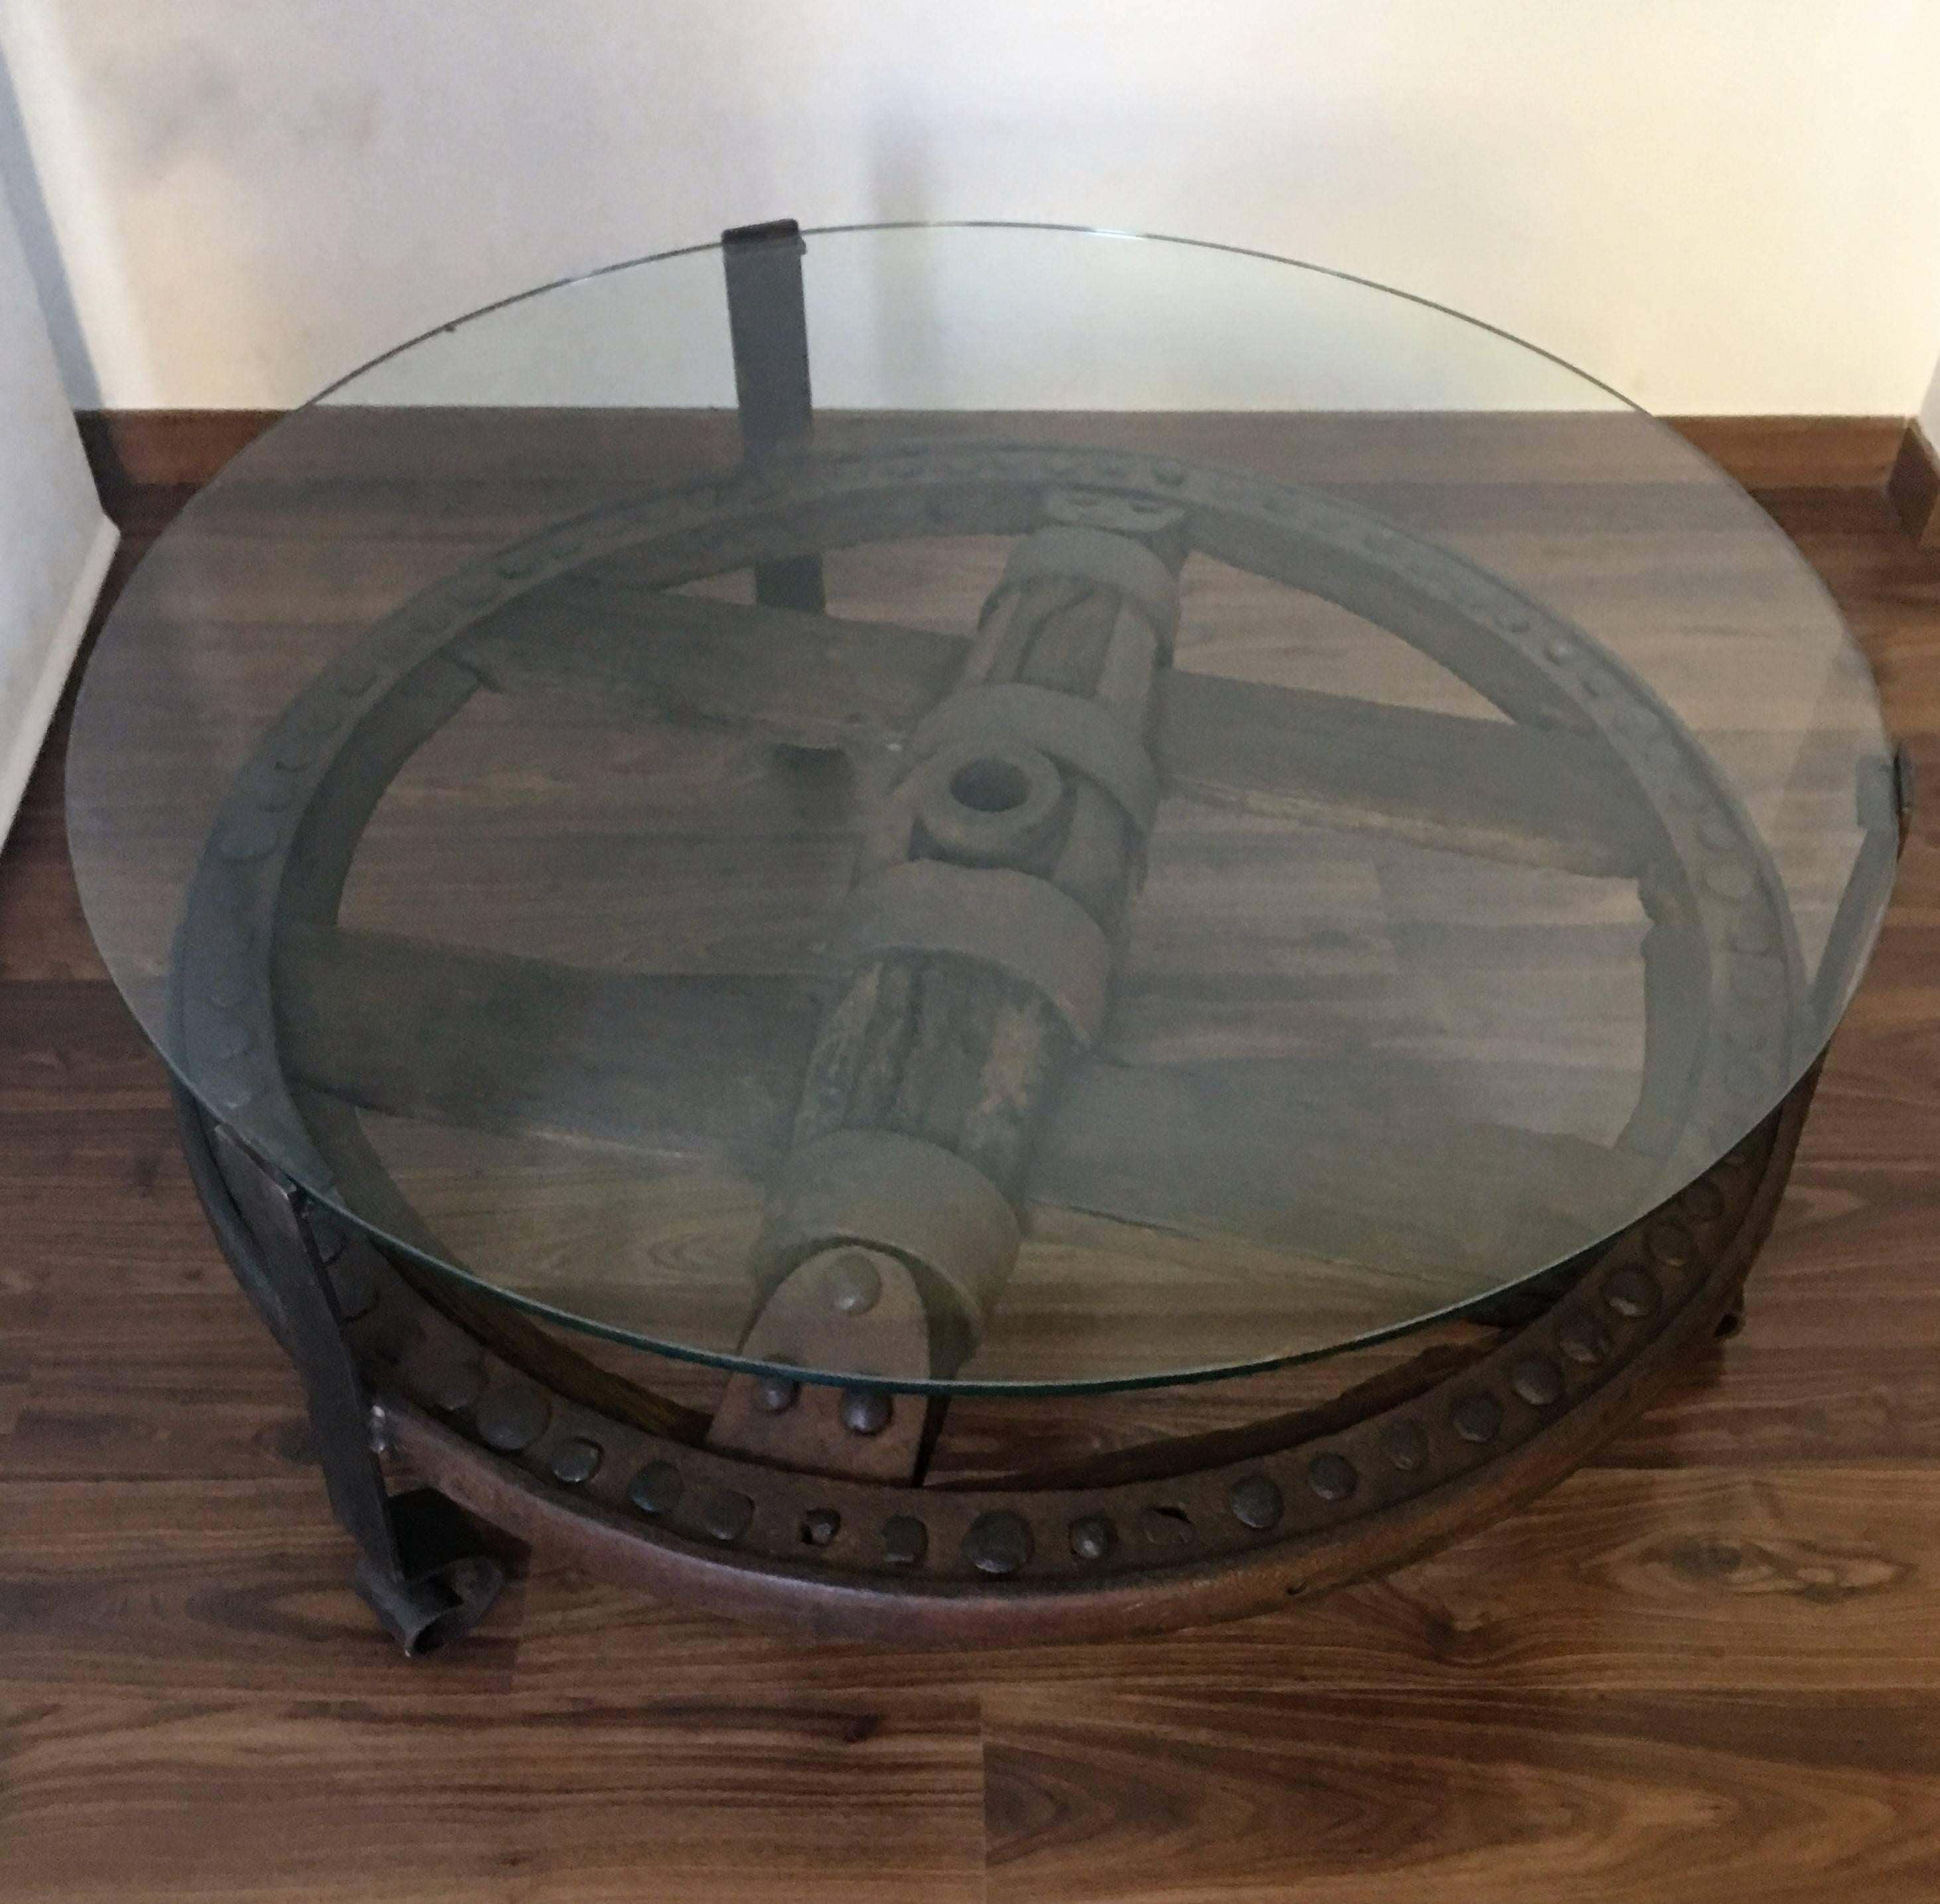 Glass top wooden wagon white wheel accent table.
Restored.

Indoor & Outdoor

Height to the wheel: 12in.